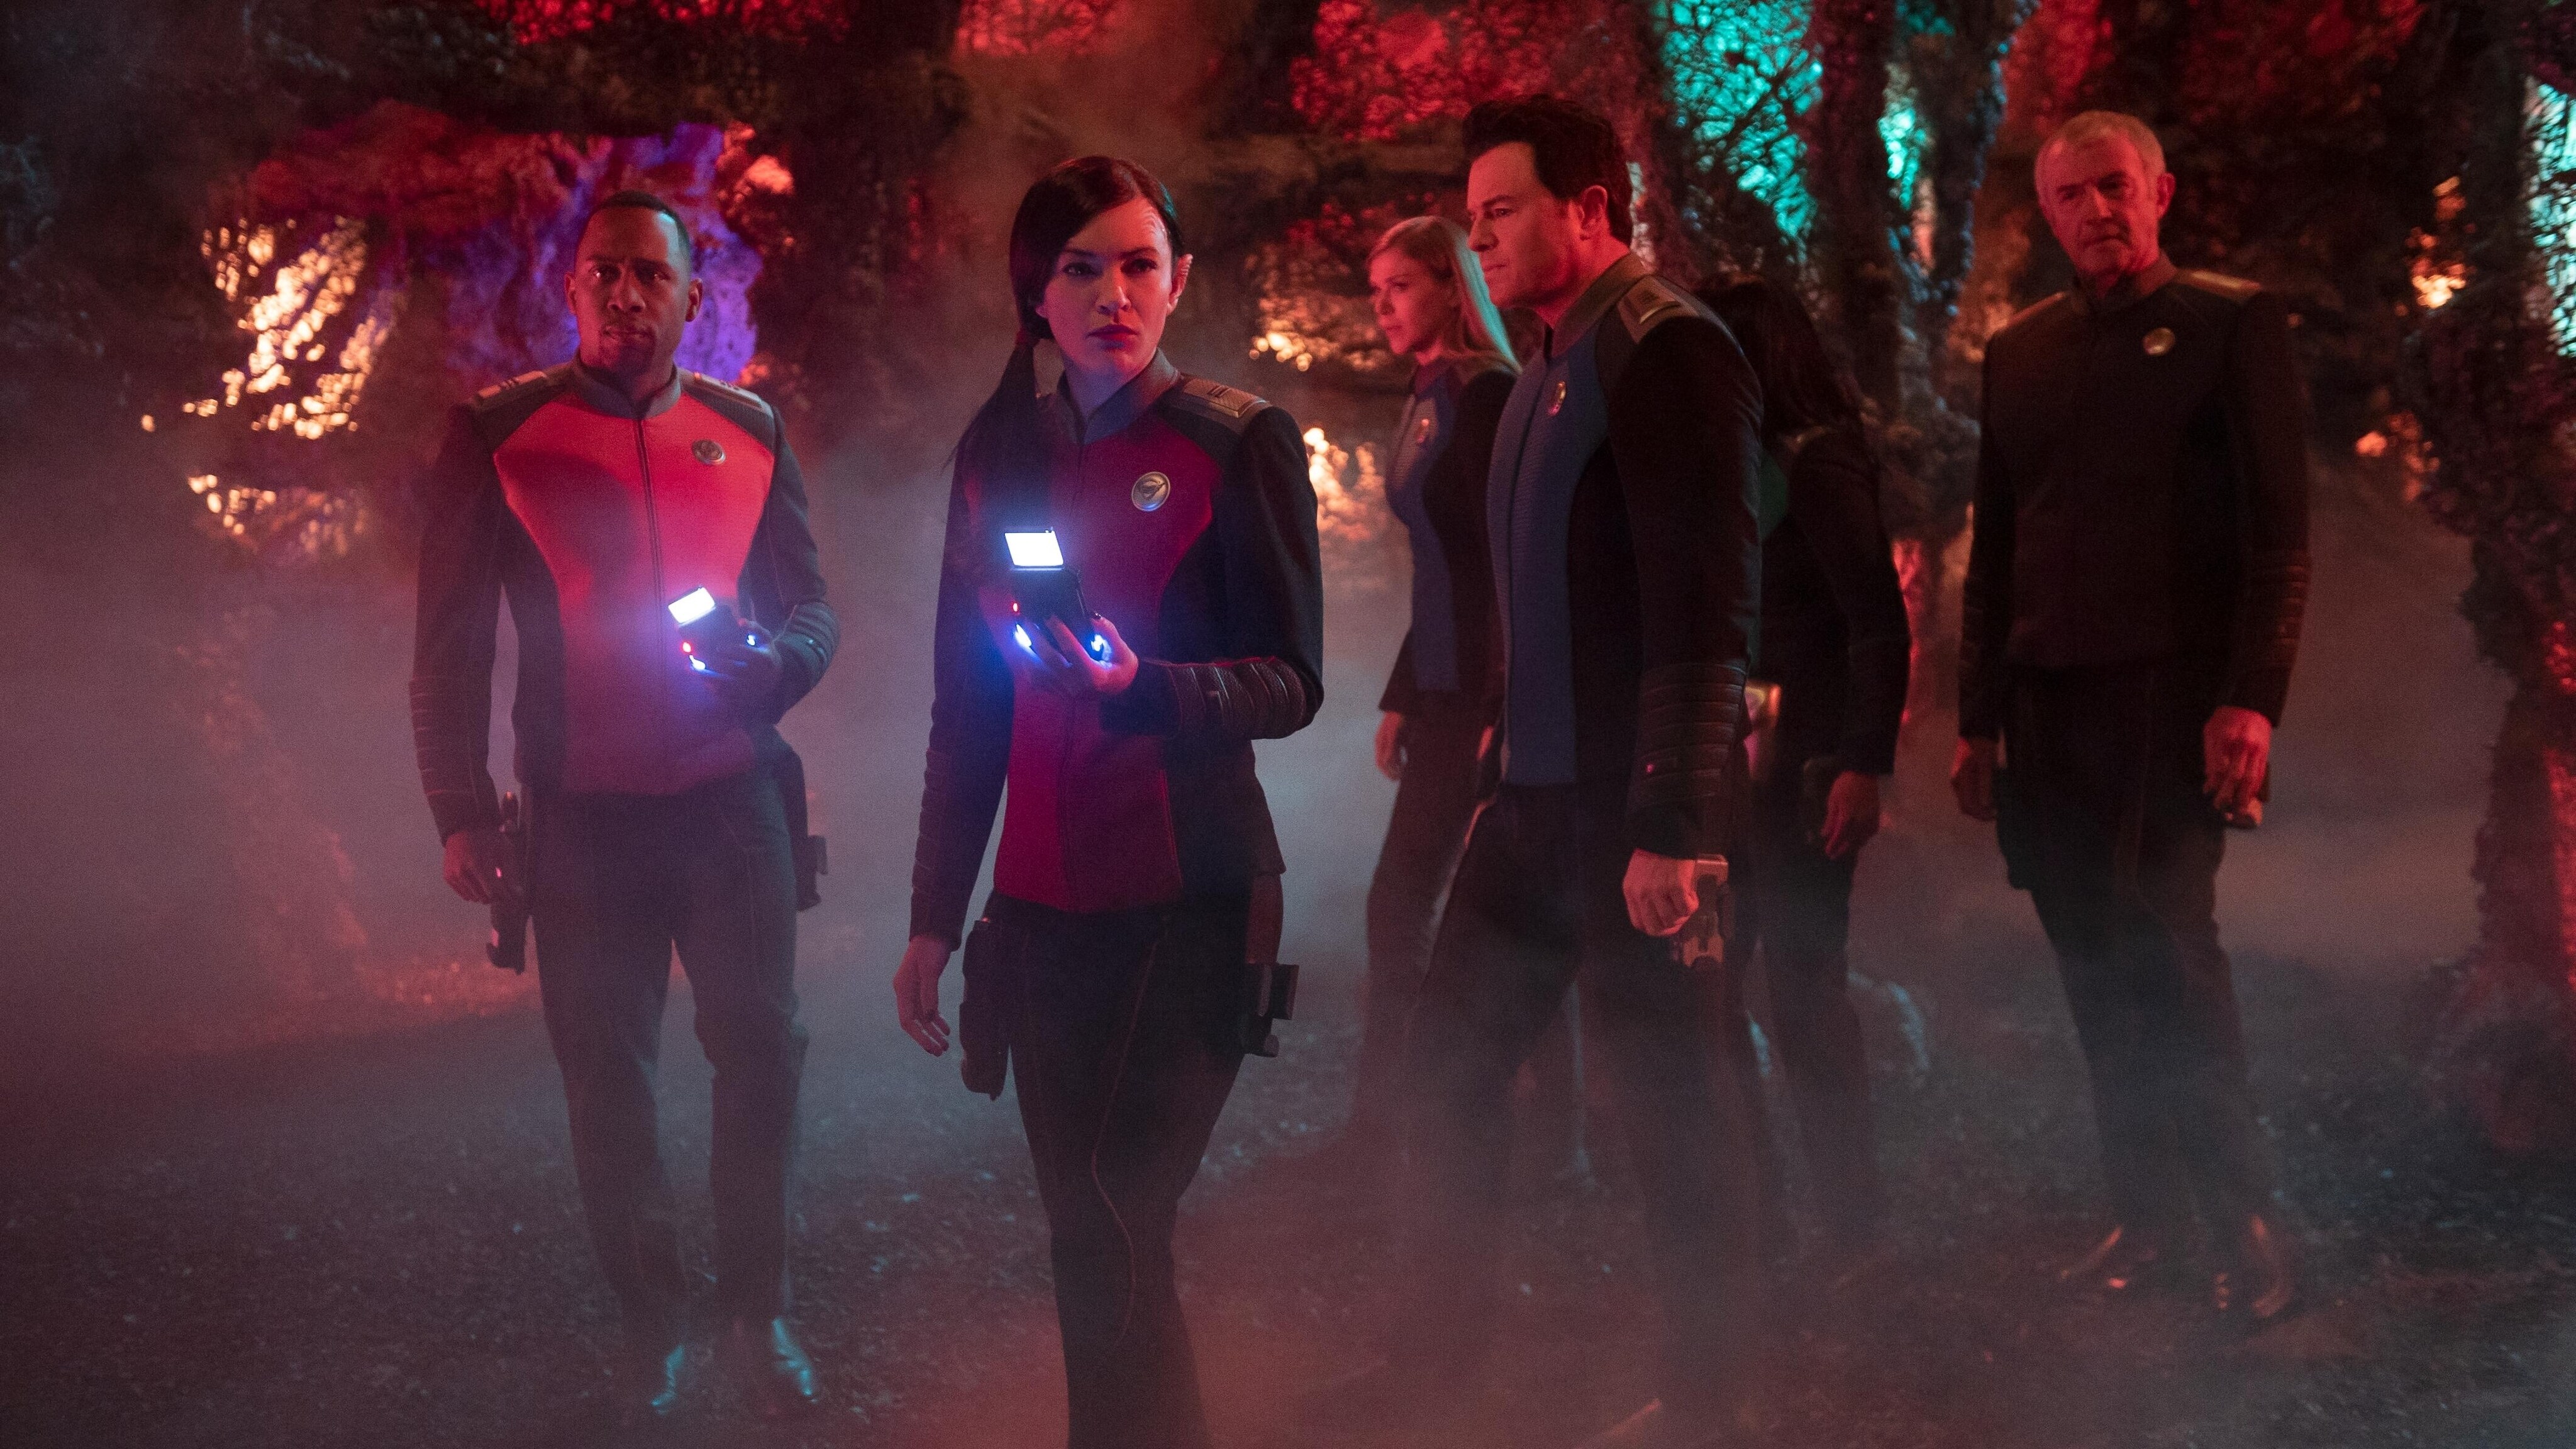 The Orville: New Horizons -- “Shadow Realms” - Episode 302 -- The Orville crew embarks on a mission to explore a dangerous region of Krill space. Lt. Cmdr. John LaMarr (J Lee), Lt. Talla Keyali (Jessica Szohr), Cmdr. Kelly Grayson (Adrianne Palicki), Capt. Ed Mercer (Seth MacFarlane) and Admiral Christie (James Read), shown. (Photo by: Kevin Estrada/Hulu)